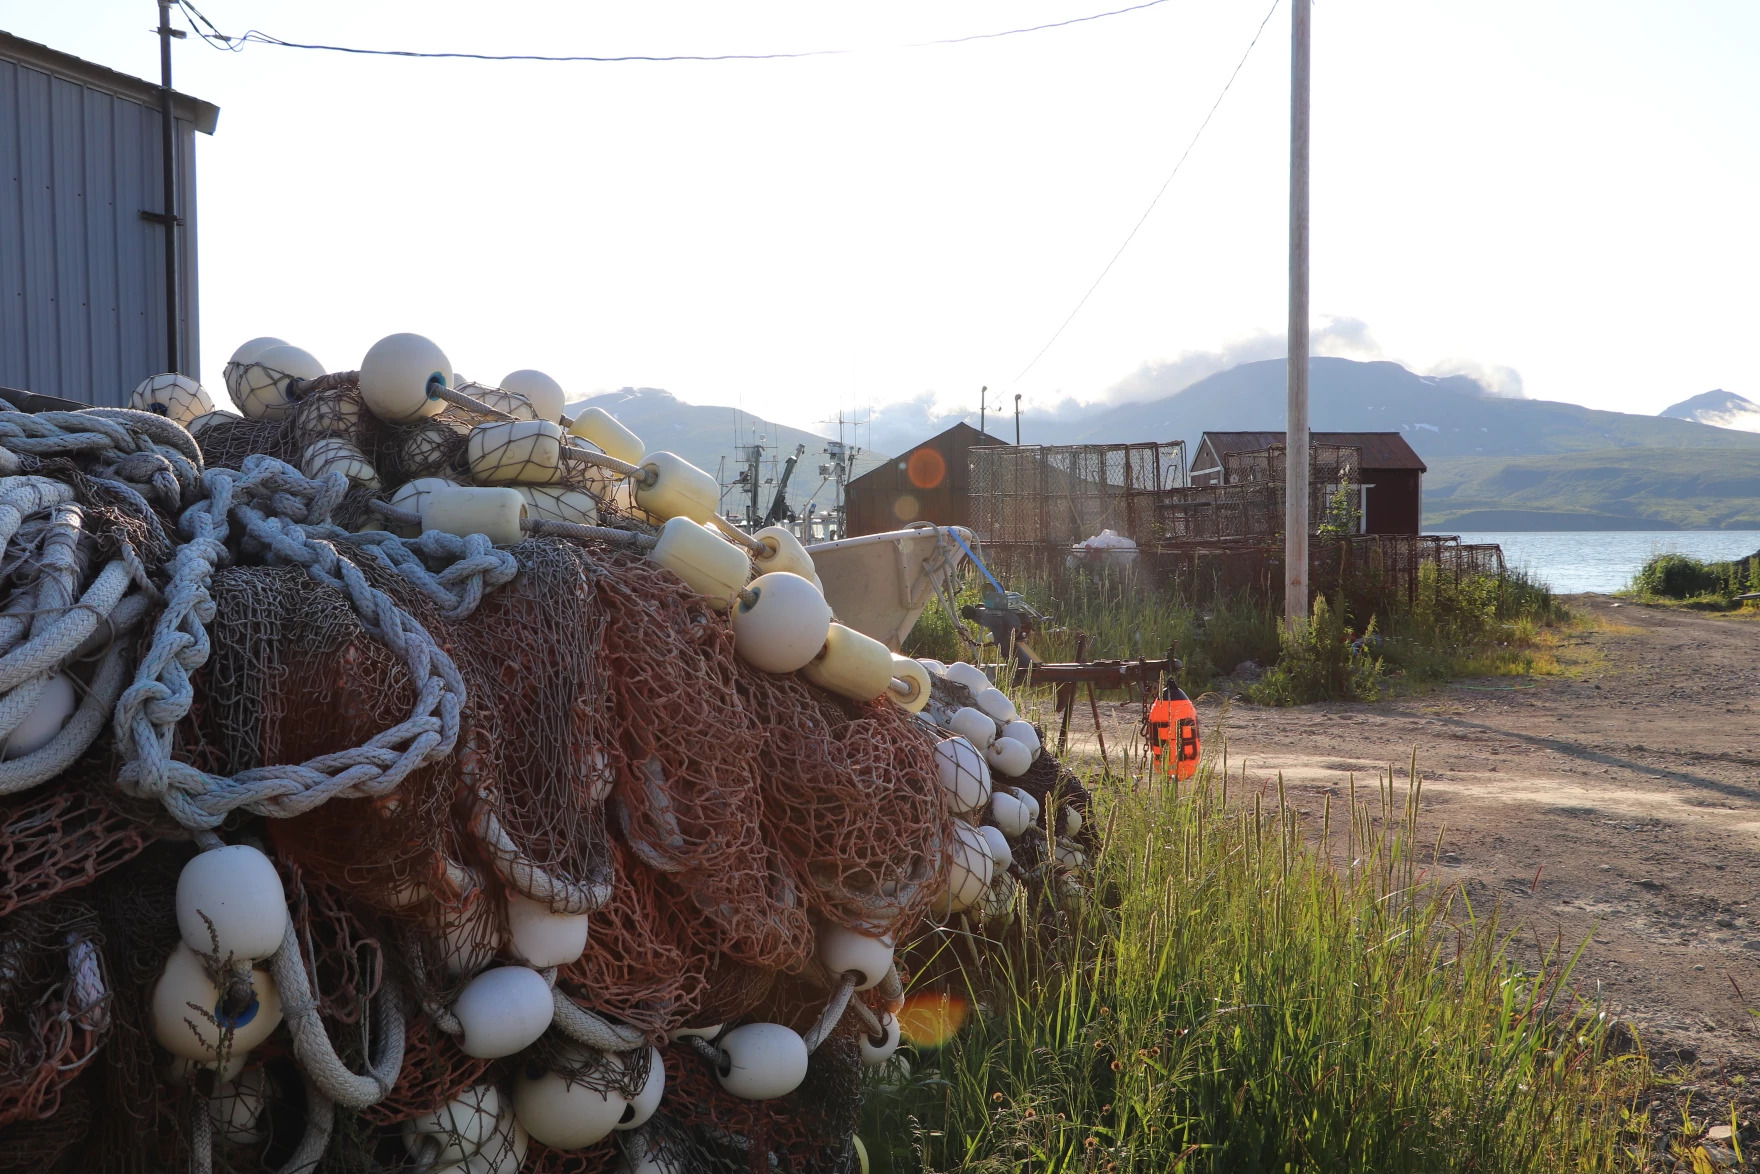 Exterior: buoys and nets for fishing, piled on land